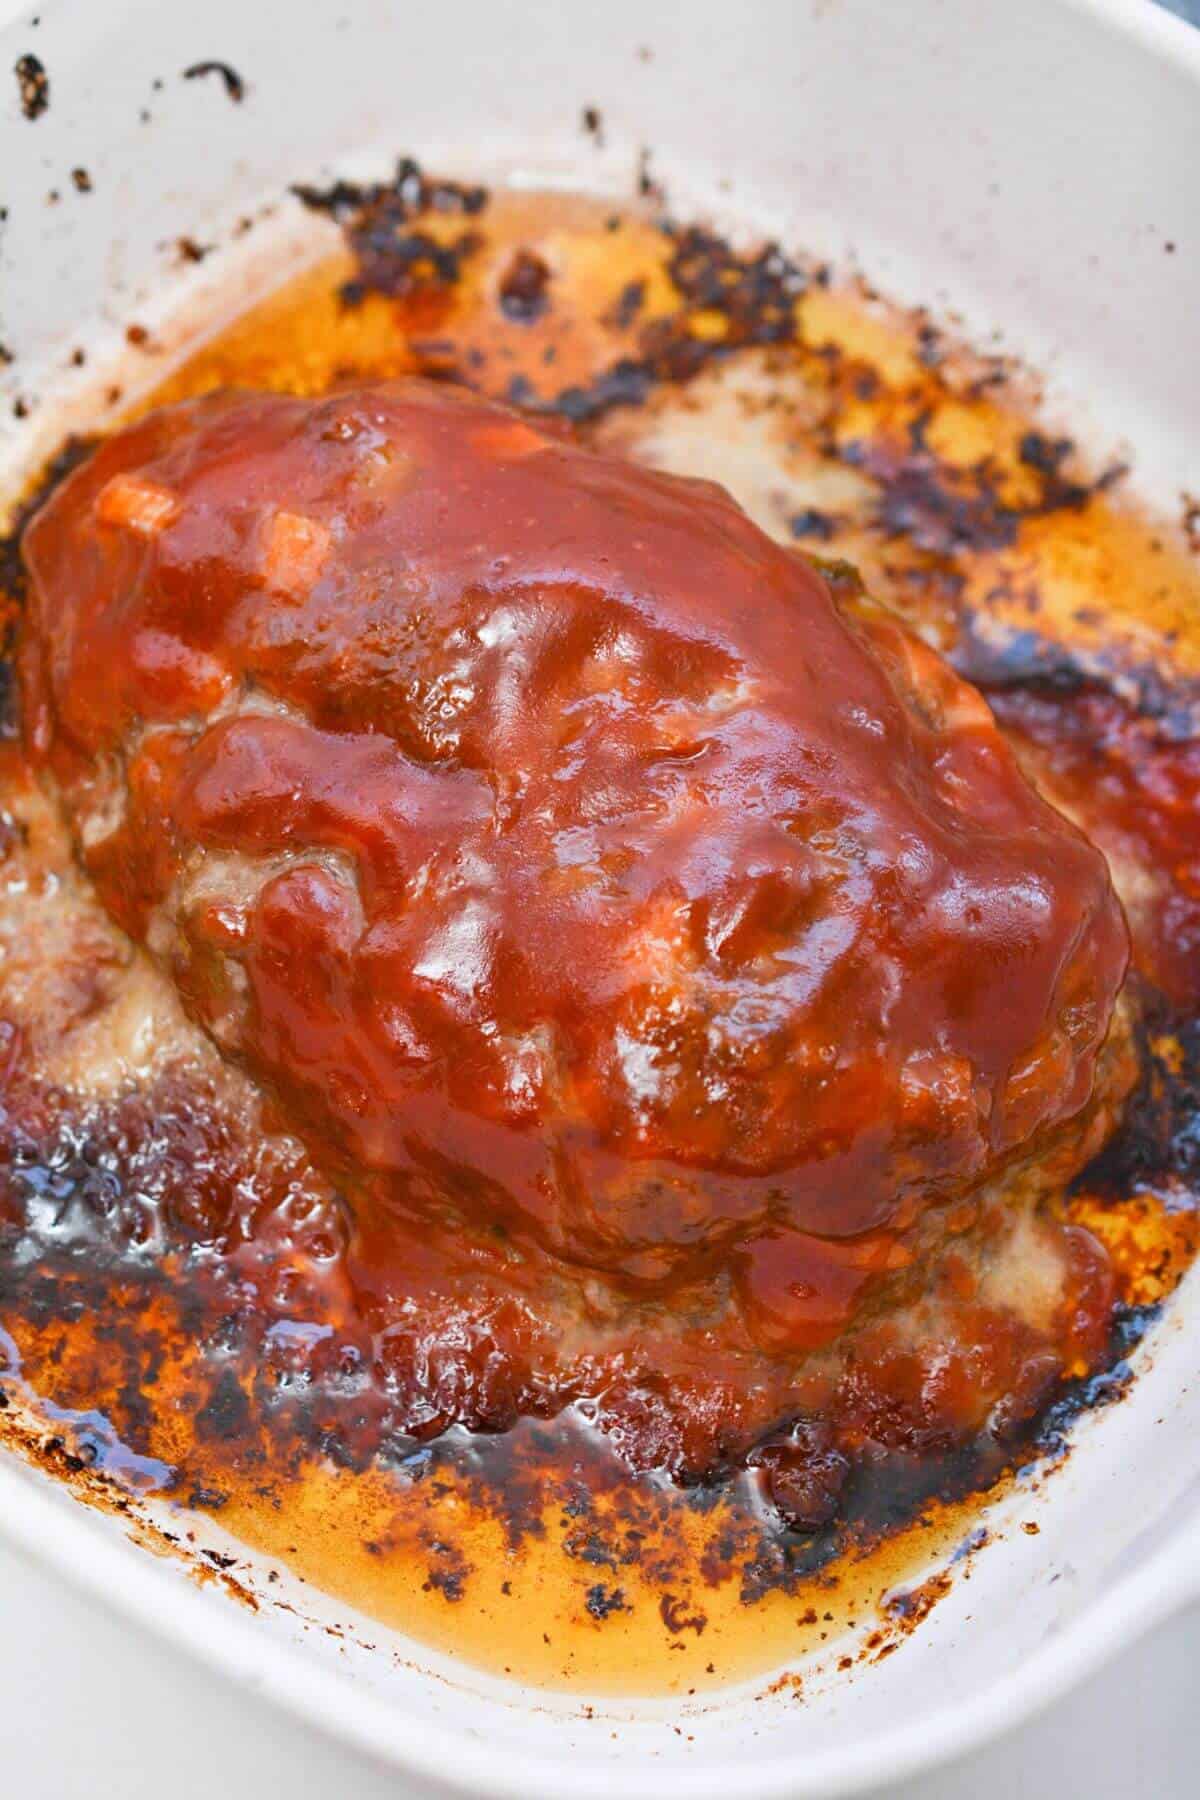 Meatloaf in a baking dish with sauce.